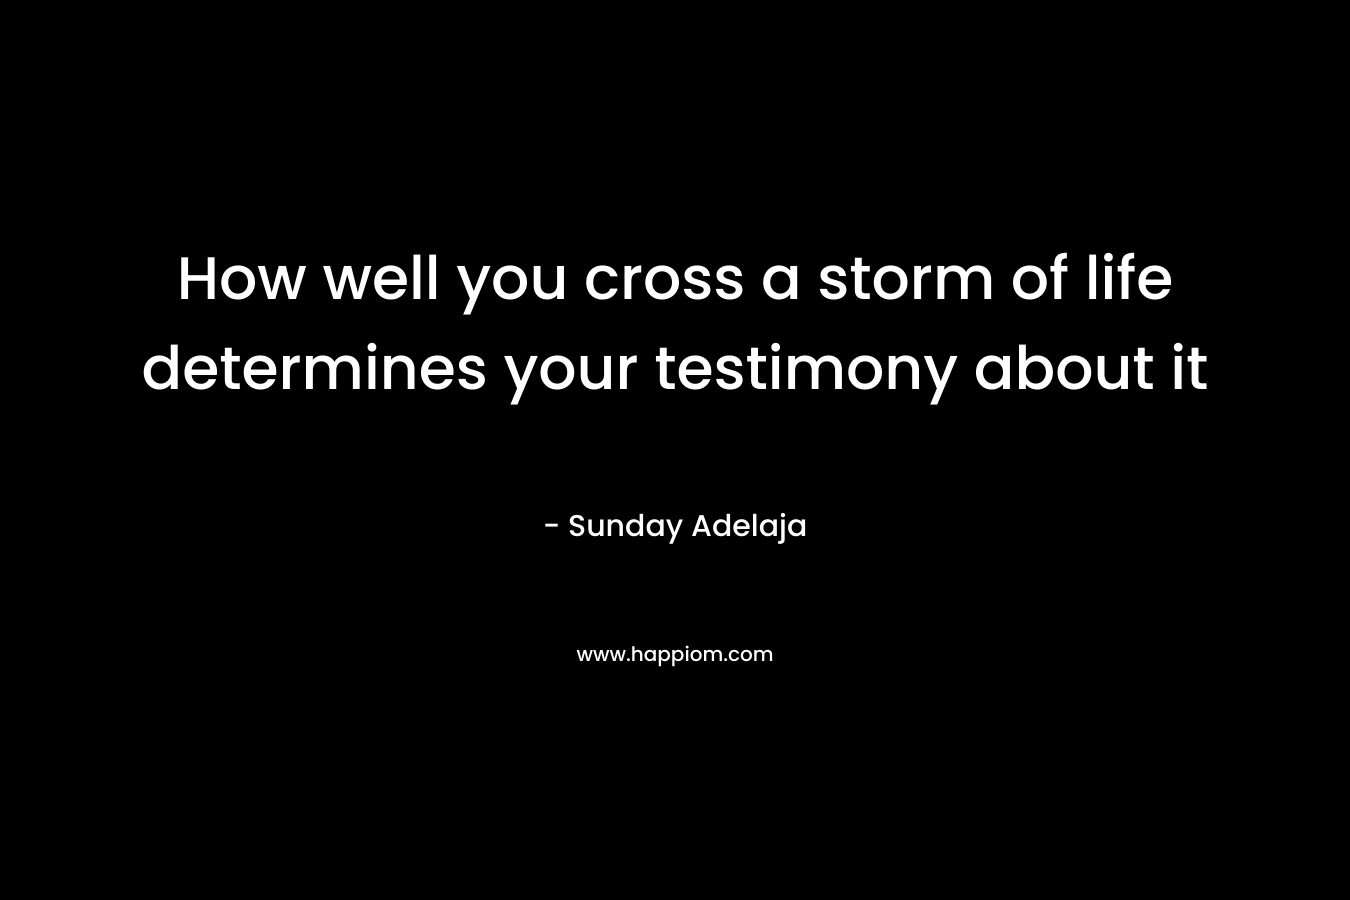 How well you cross a storm of life determines your testimony about it